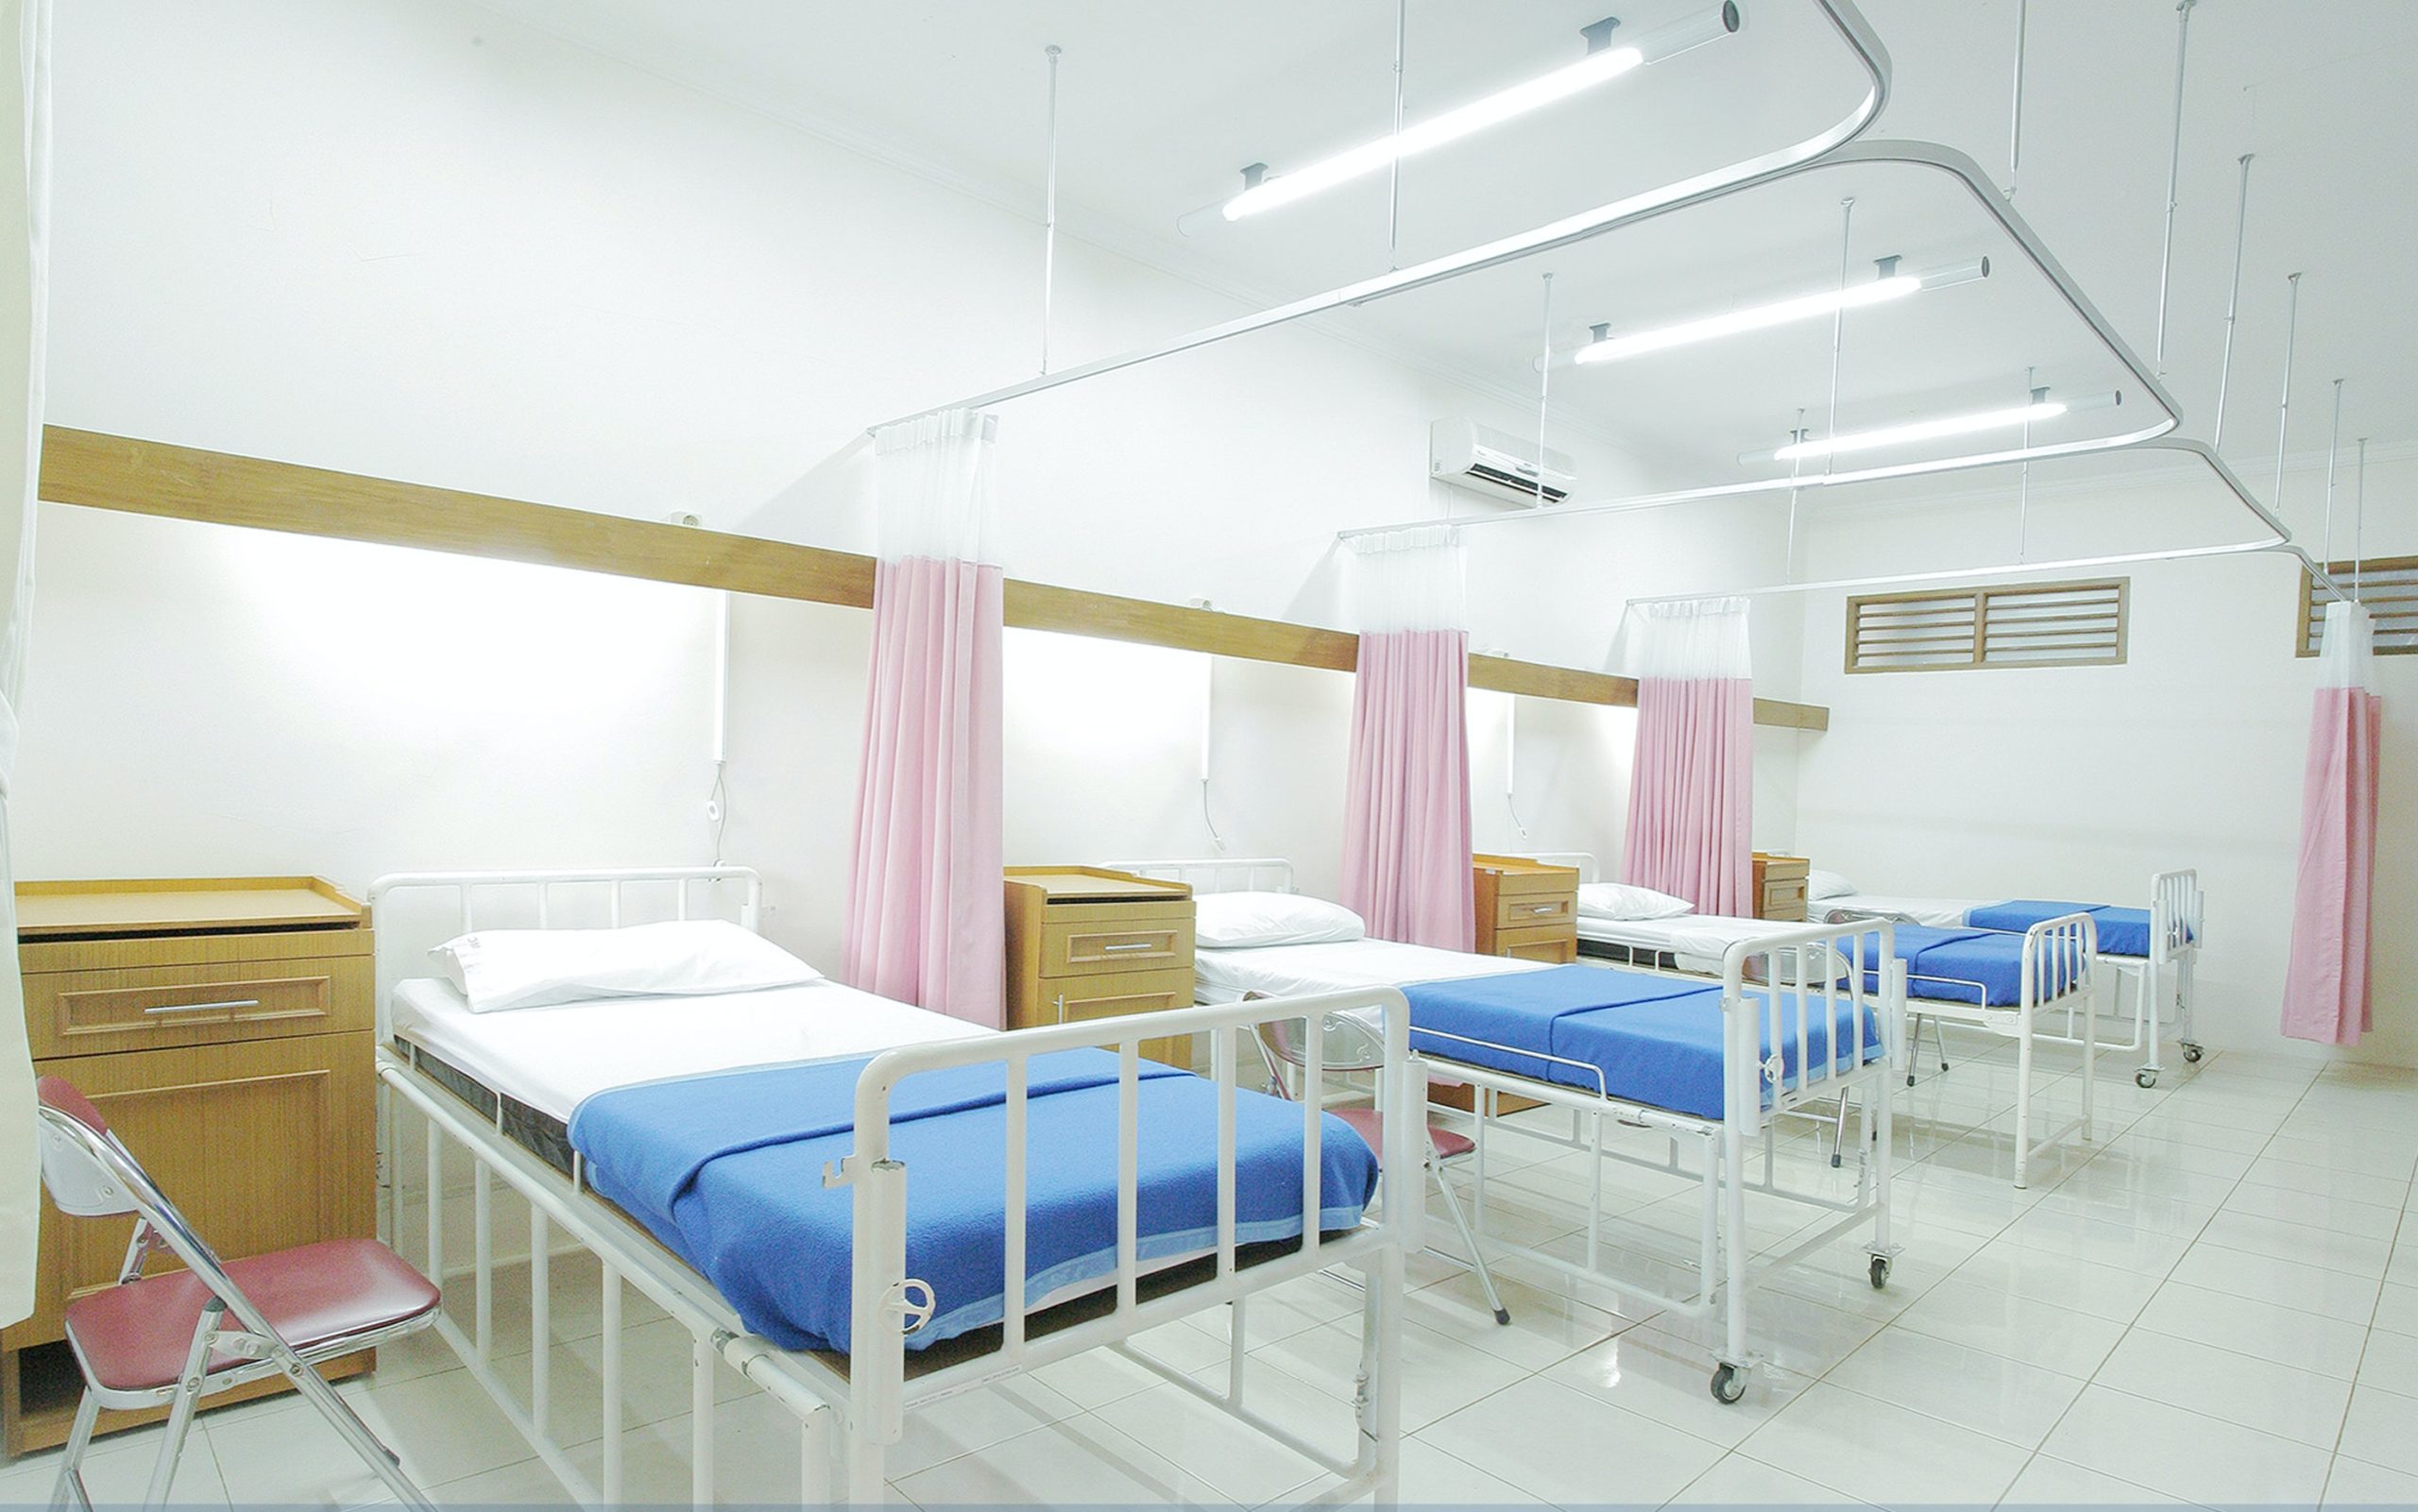 Three hospital beds sit in a row surrounded by bright lights and white wallpaper.